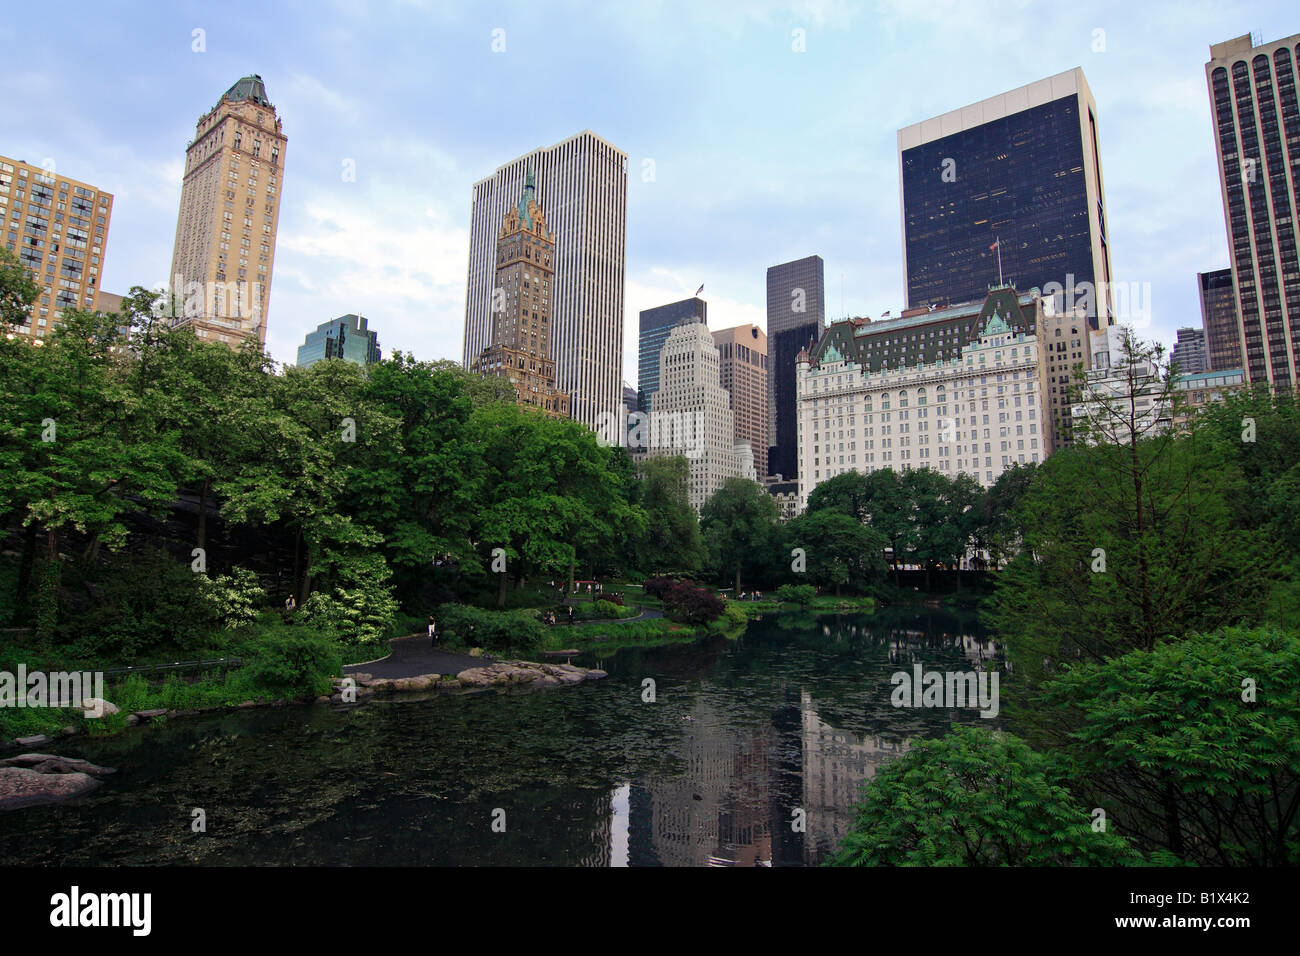 Manhattan buildings reflecting in The Pond - Central Park, New York City, USA Stock Photo